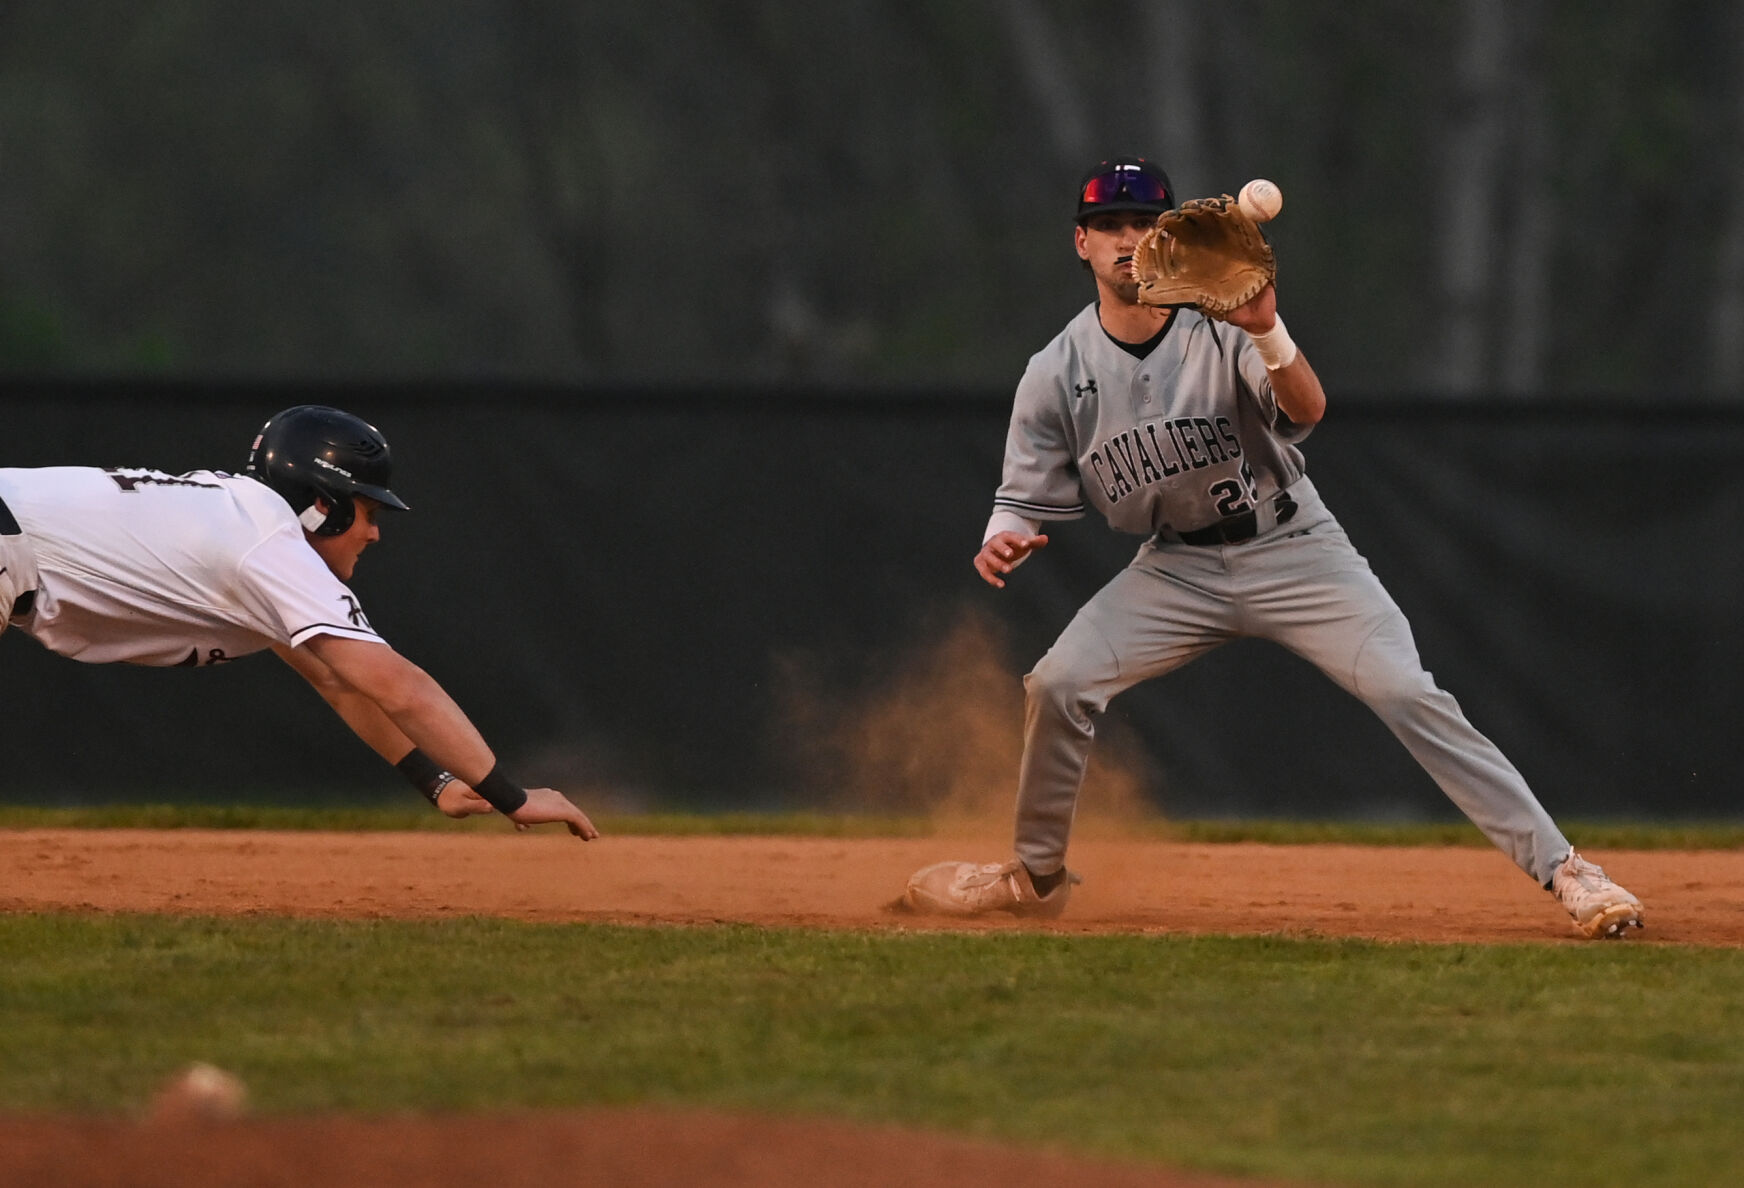 Amherst Baseball’s Stunning Comeback Secures 6-5 Win Over JF with Walk-Off Double Steal